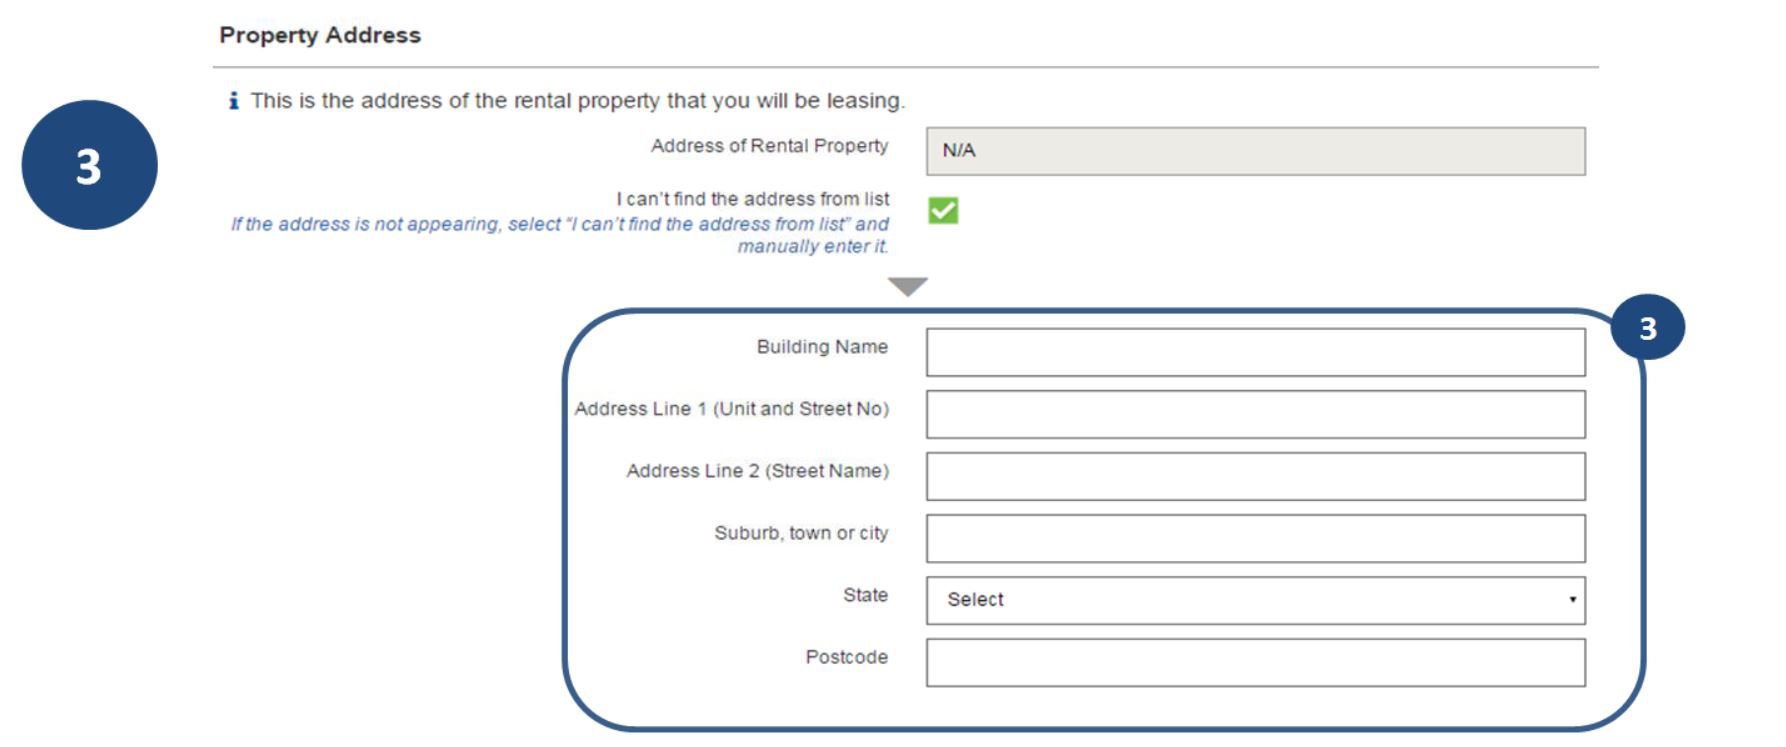 3. If the address does not appear, tick the ‘I can’t find address from list’ box and enter all the details.